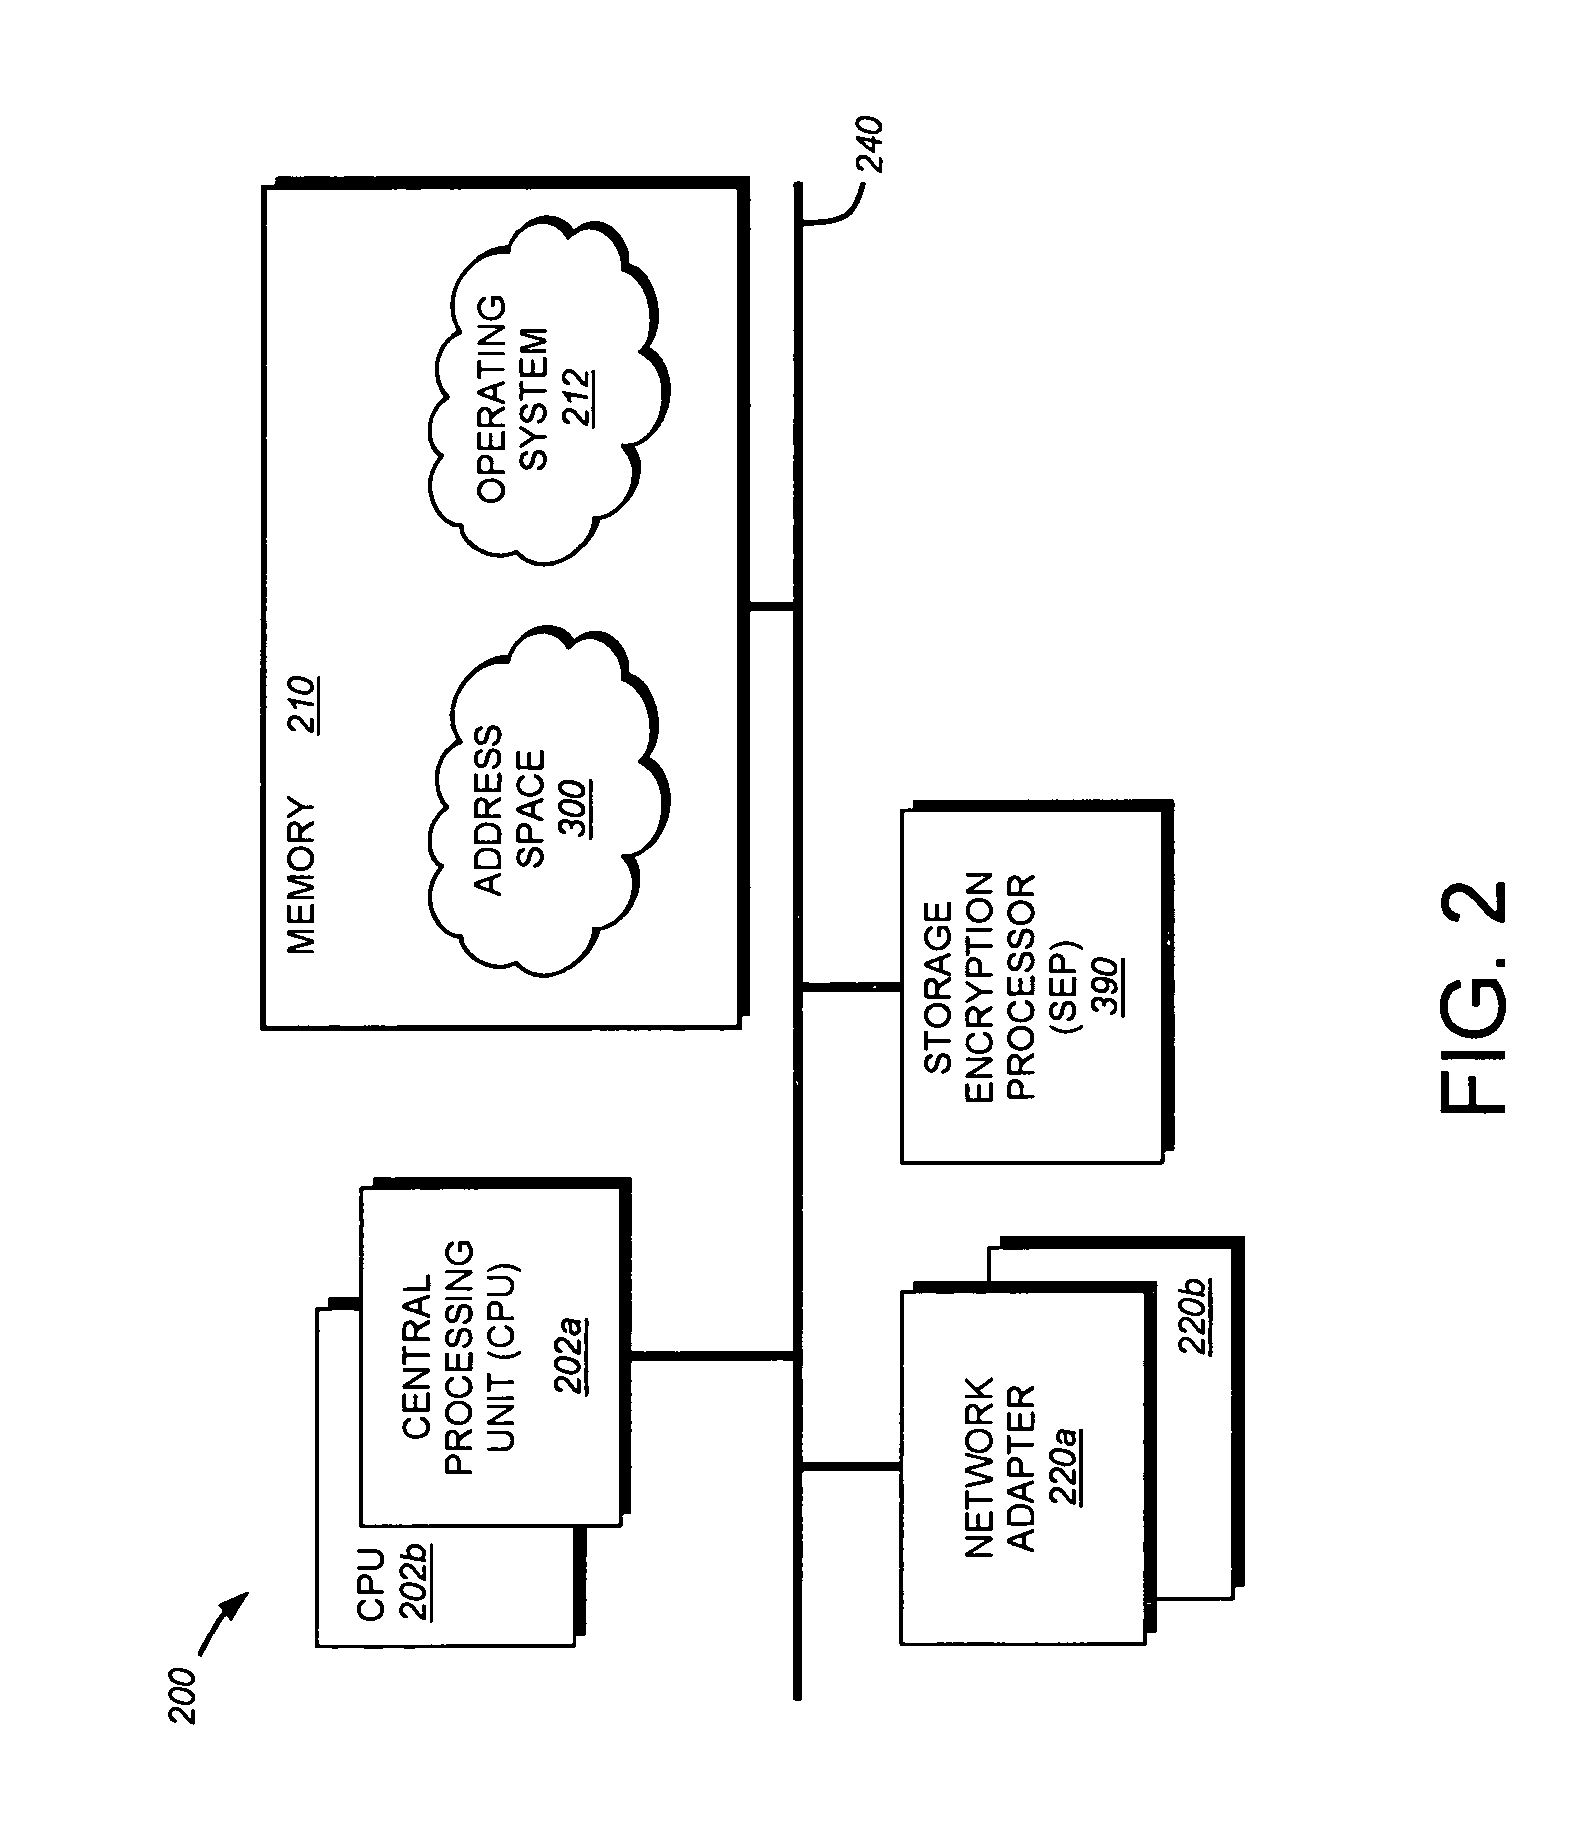 System and method for generating a single use password based on a challenge/response protocol